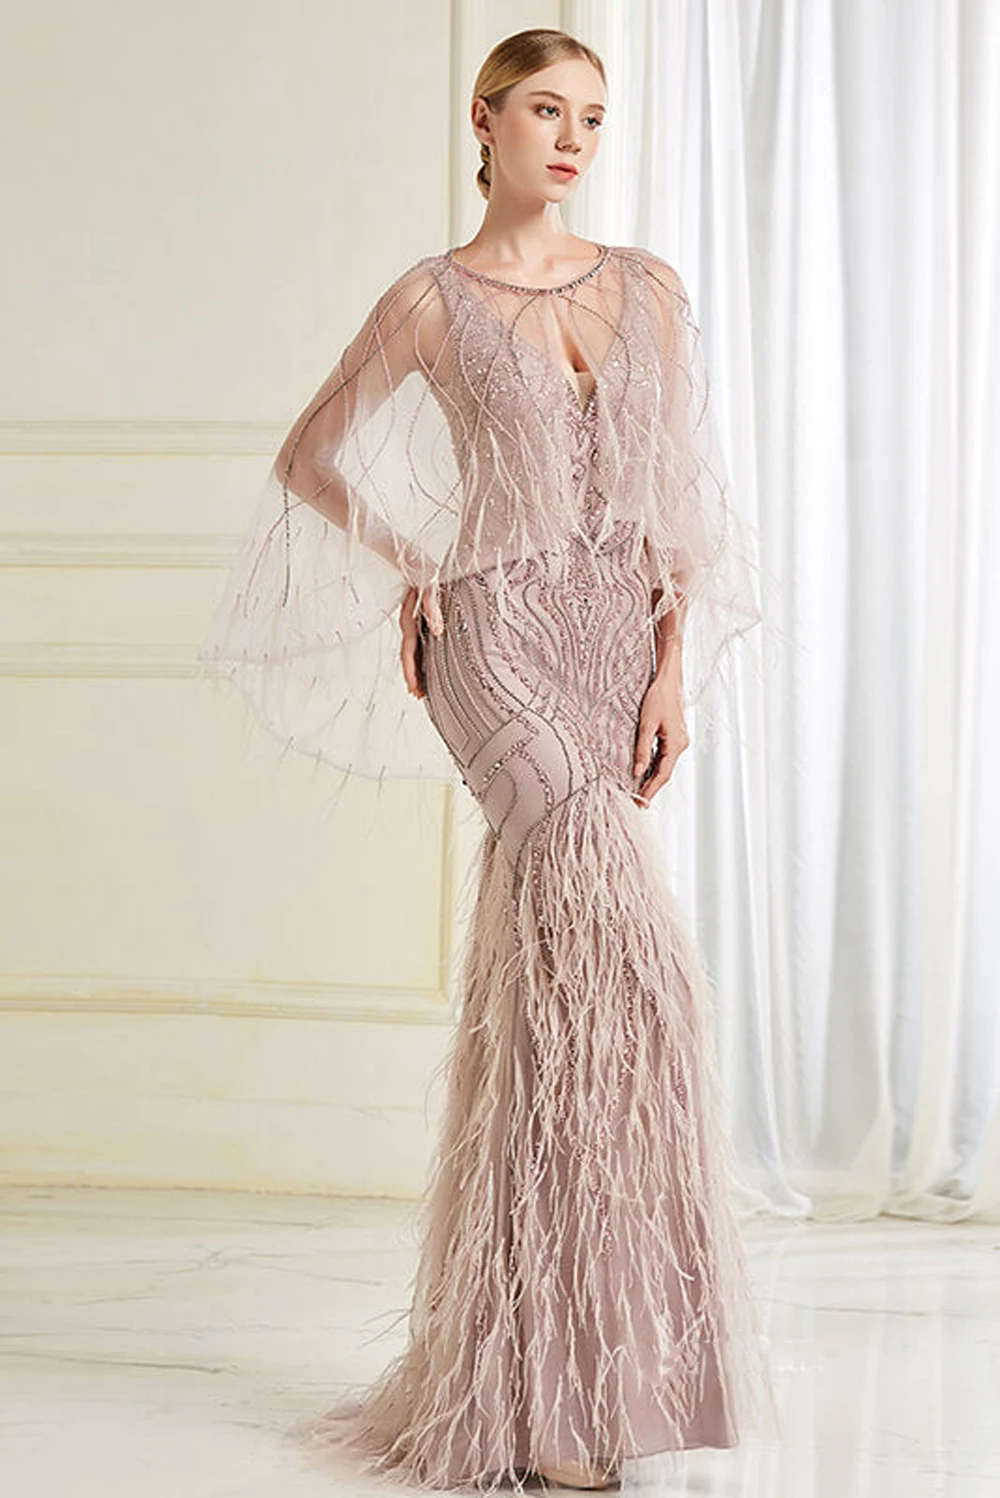 

Caramel Mermaid Beaded Evening Dresses Feather Luxury Crystal Elegant With Cape Wedding Formal Party Prom Gowns Robe De Soiree